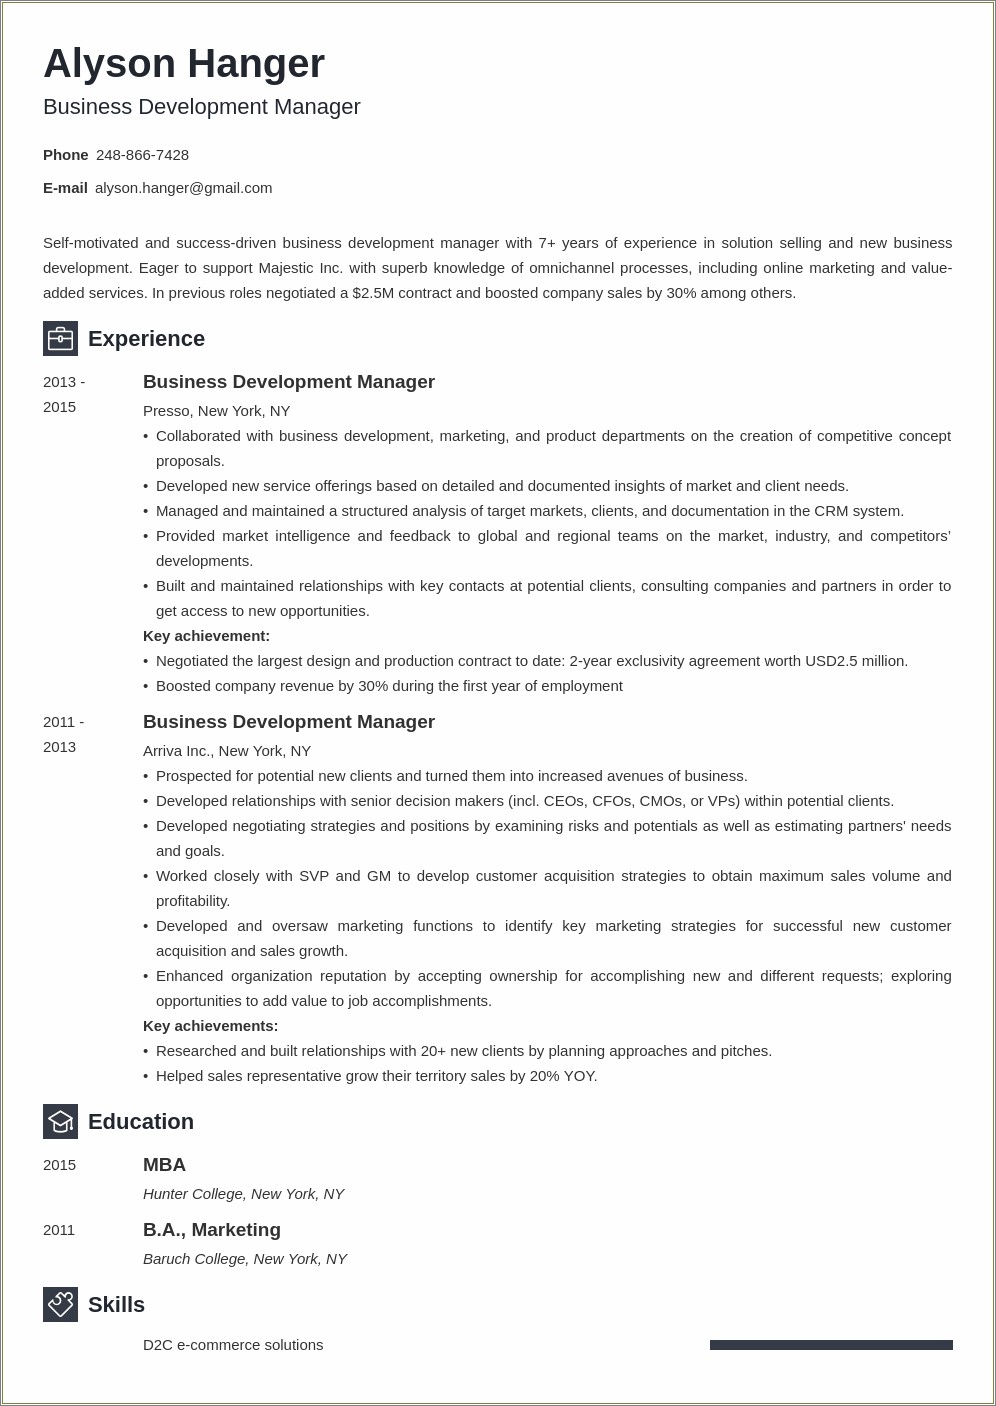 Resume Objective For Business To Business Sales